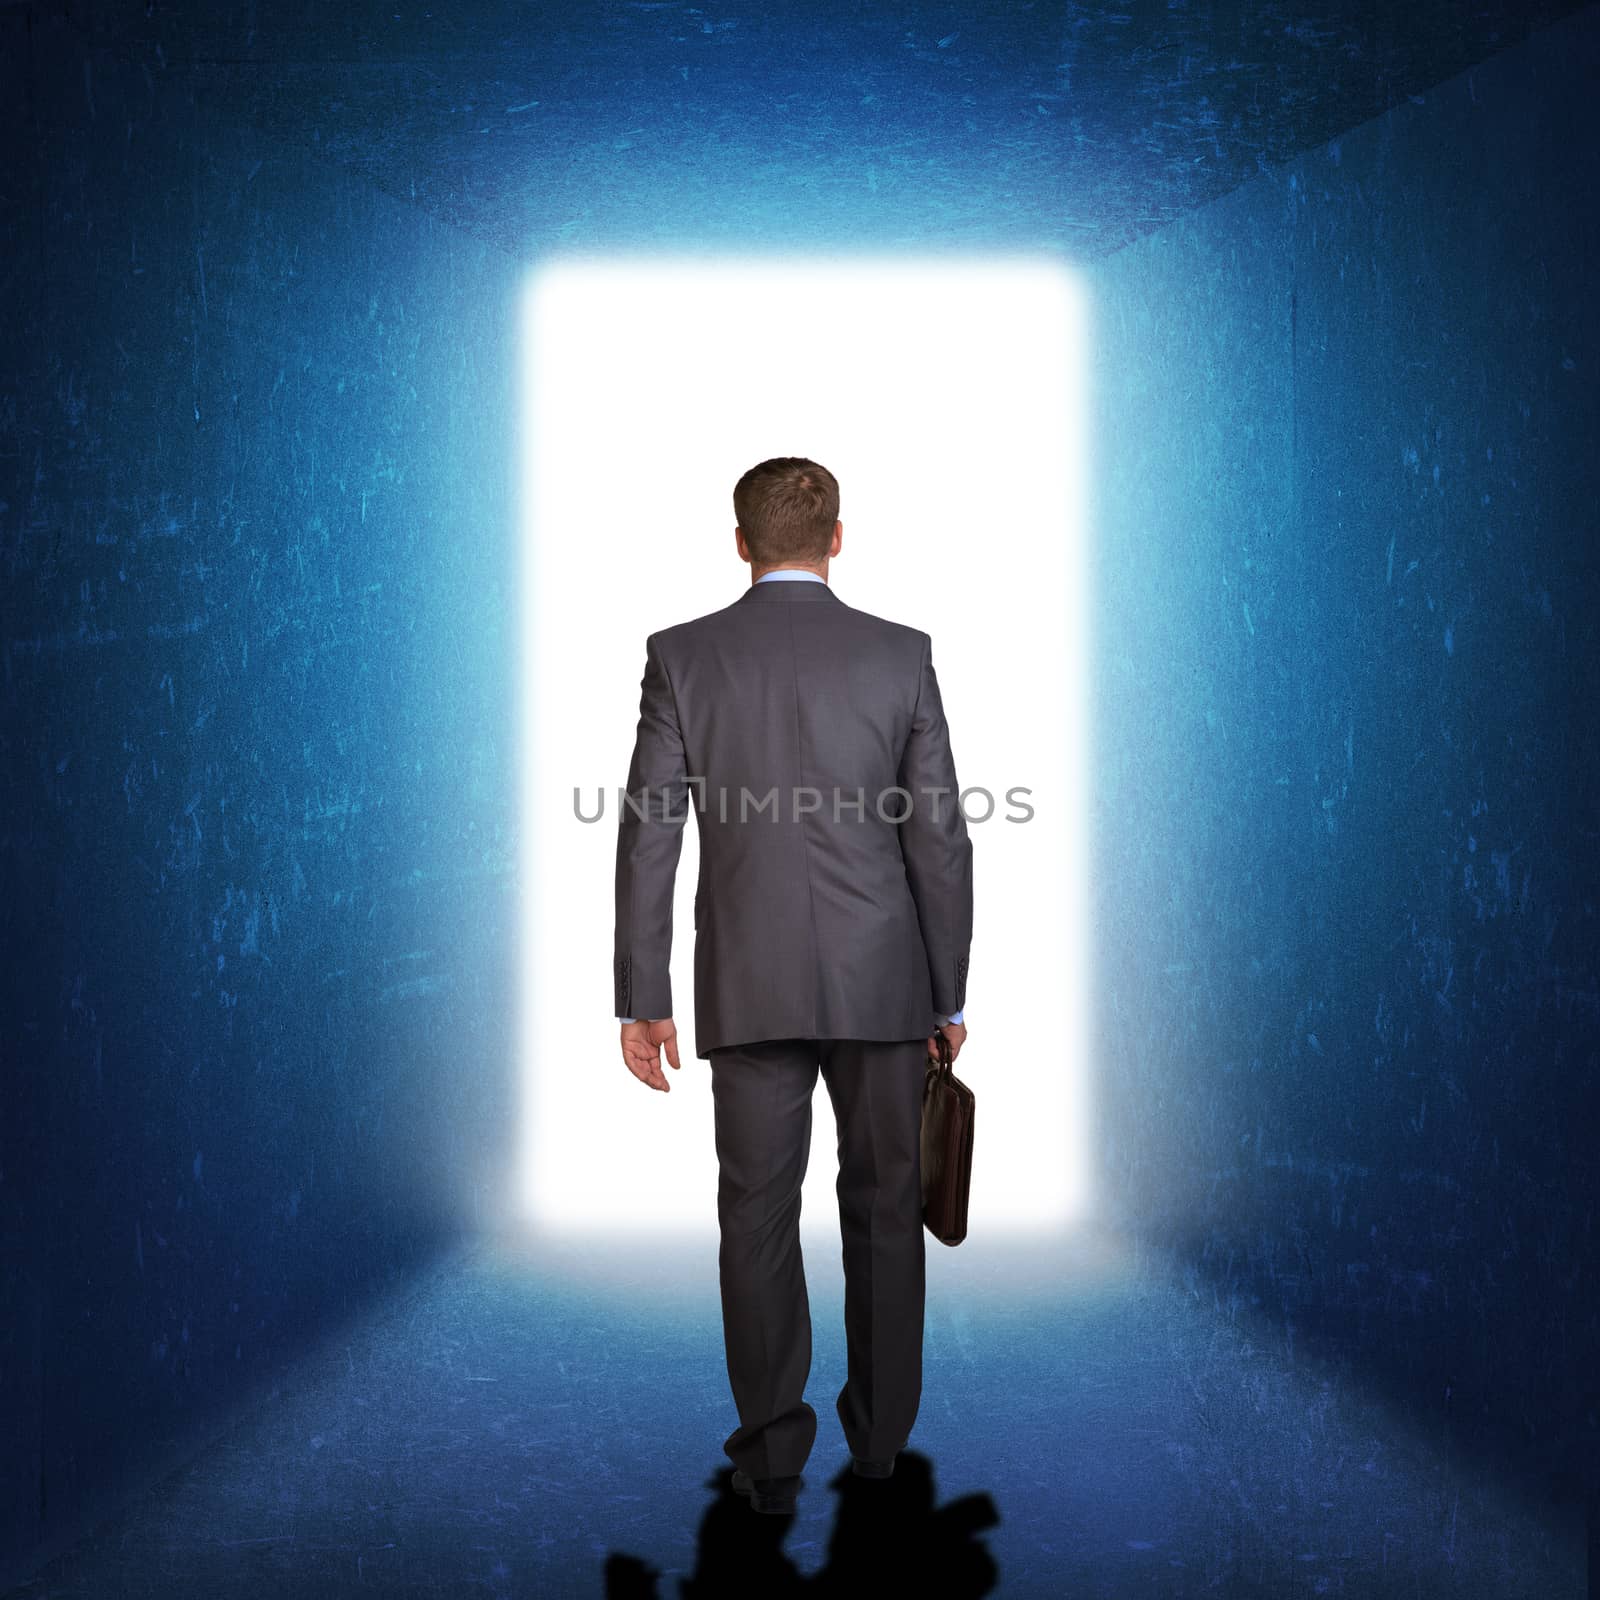 Businessman in suit with briefcase stepping through door. Business concept